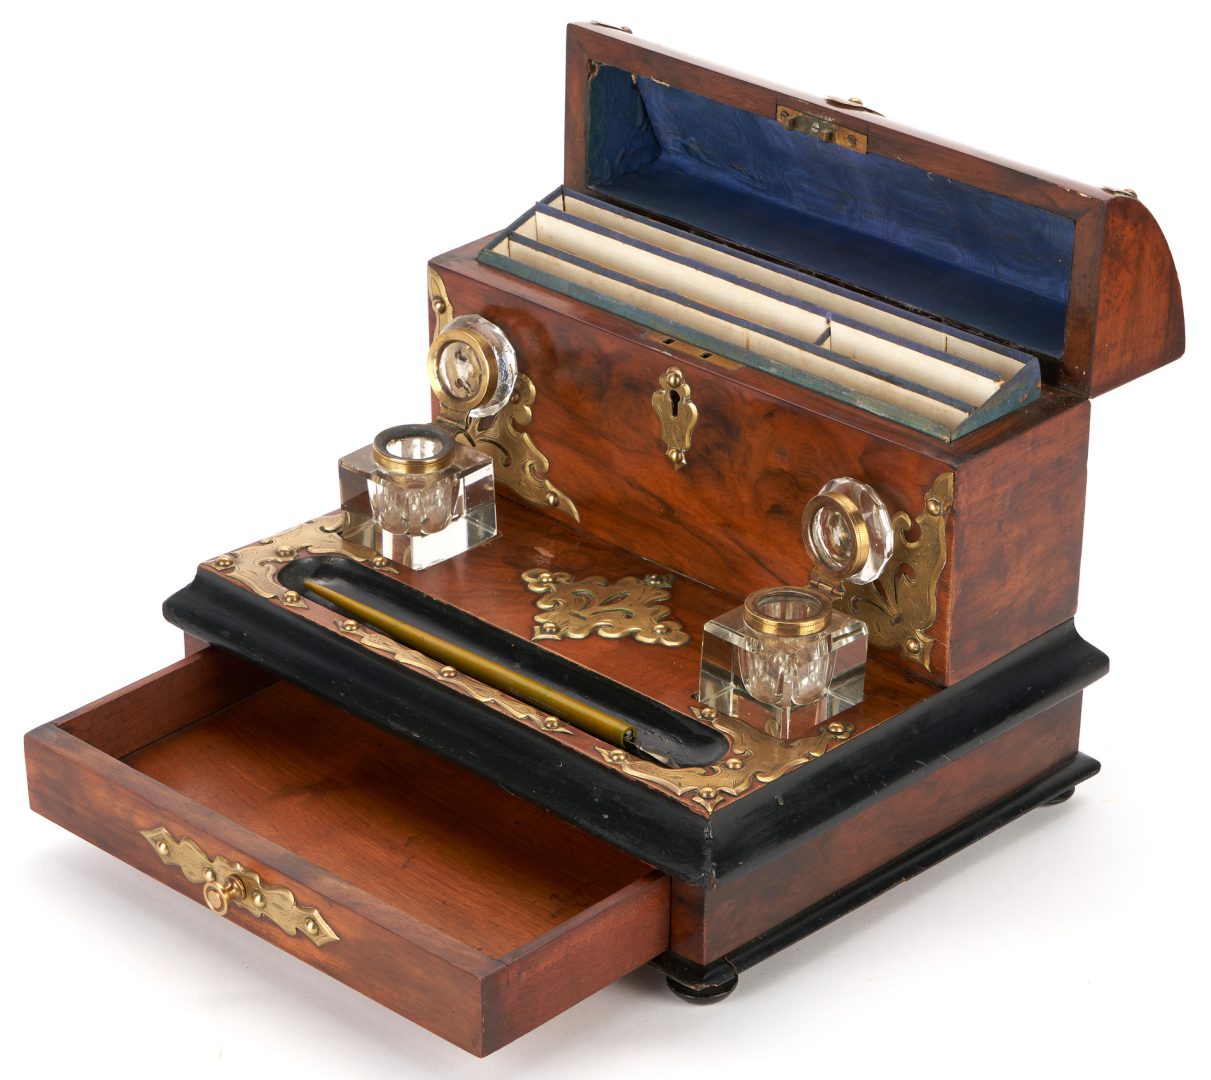 Lot 78: Napoleon III Boulle Lap Desk & Victorian Inlaid Desk Stand